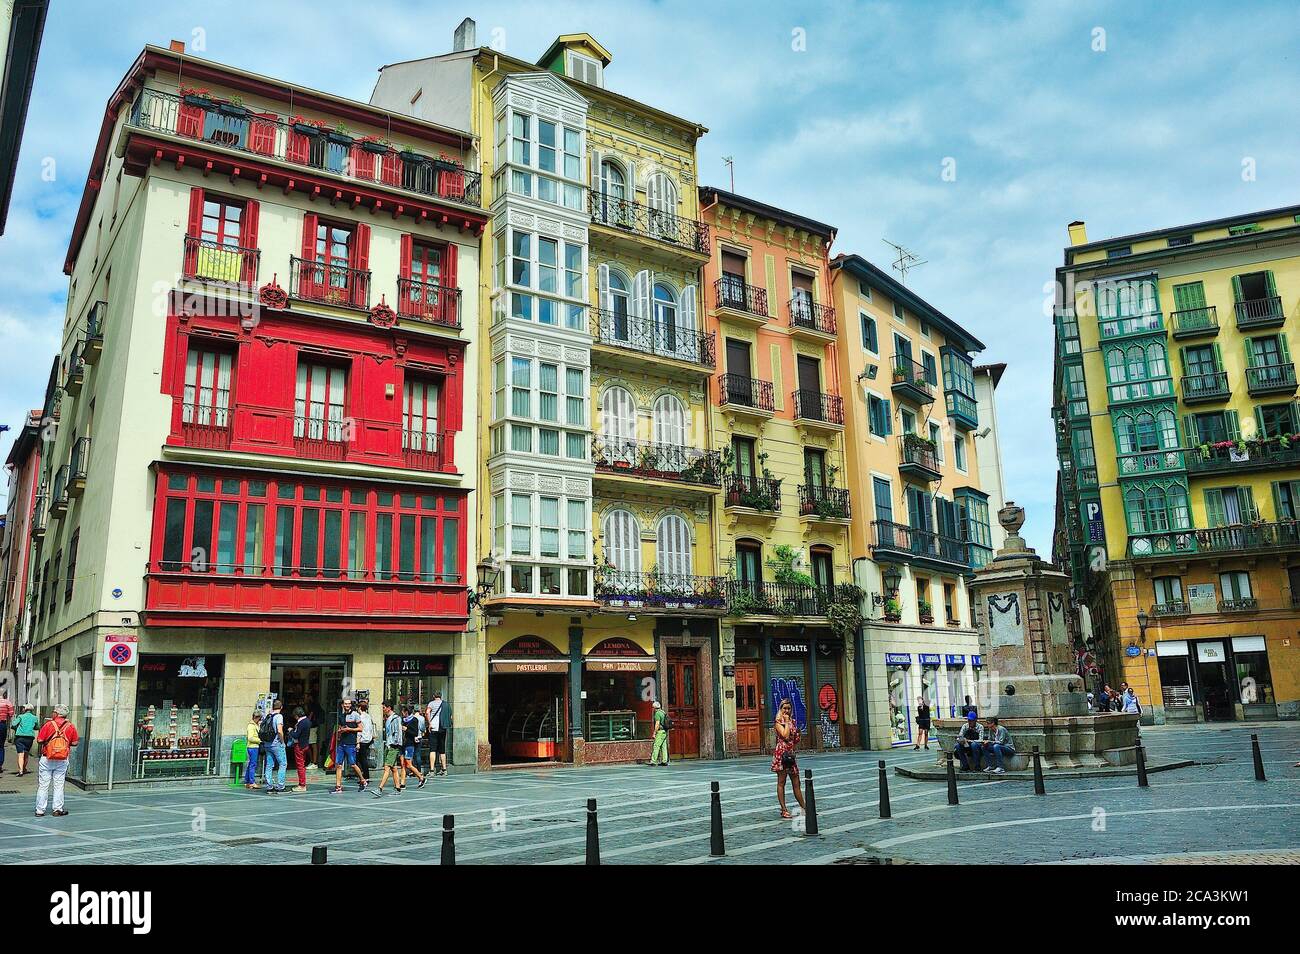 The neighborhood of Siete Calles (the Seven Streets), the historical Downtown. Bilbao city, Vizcaya province, Spain Stock Photo